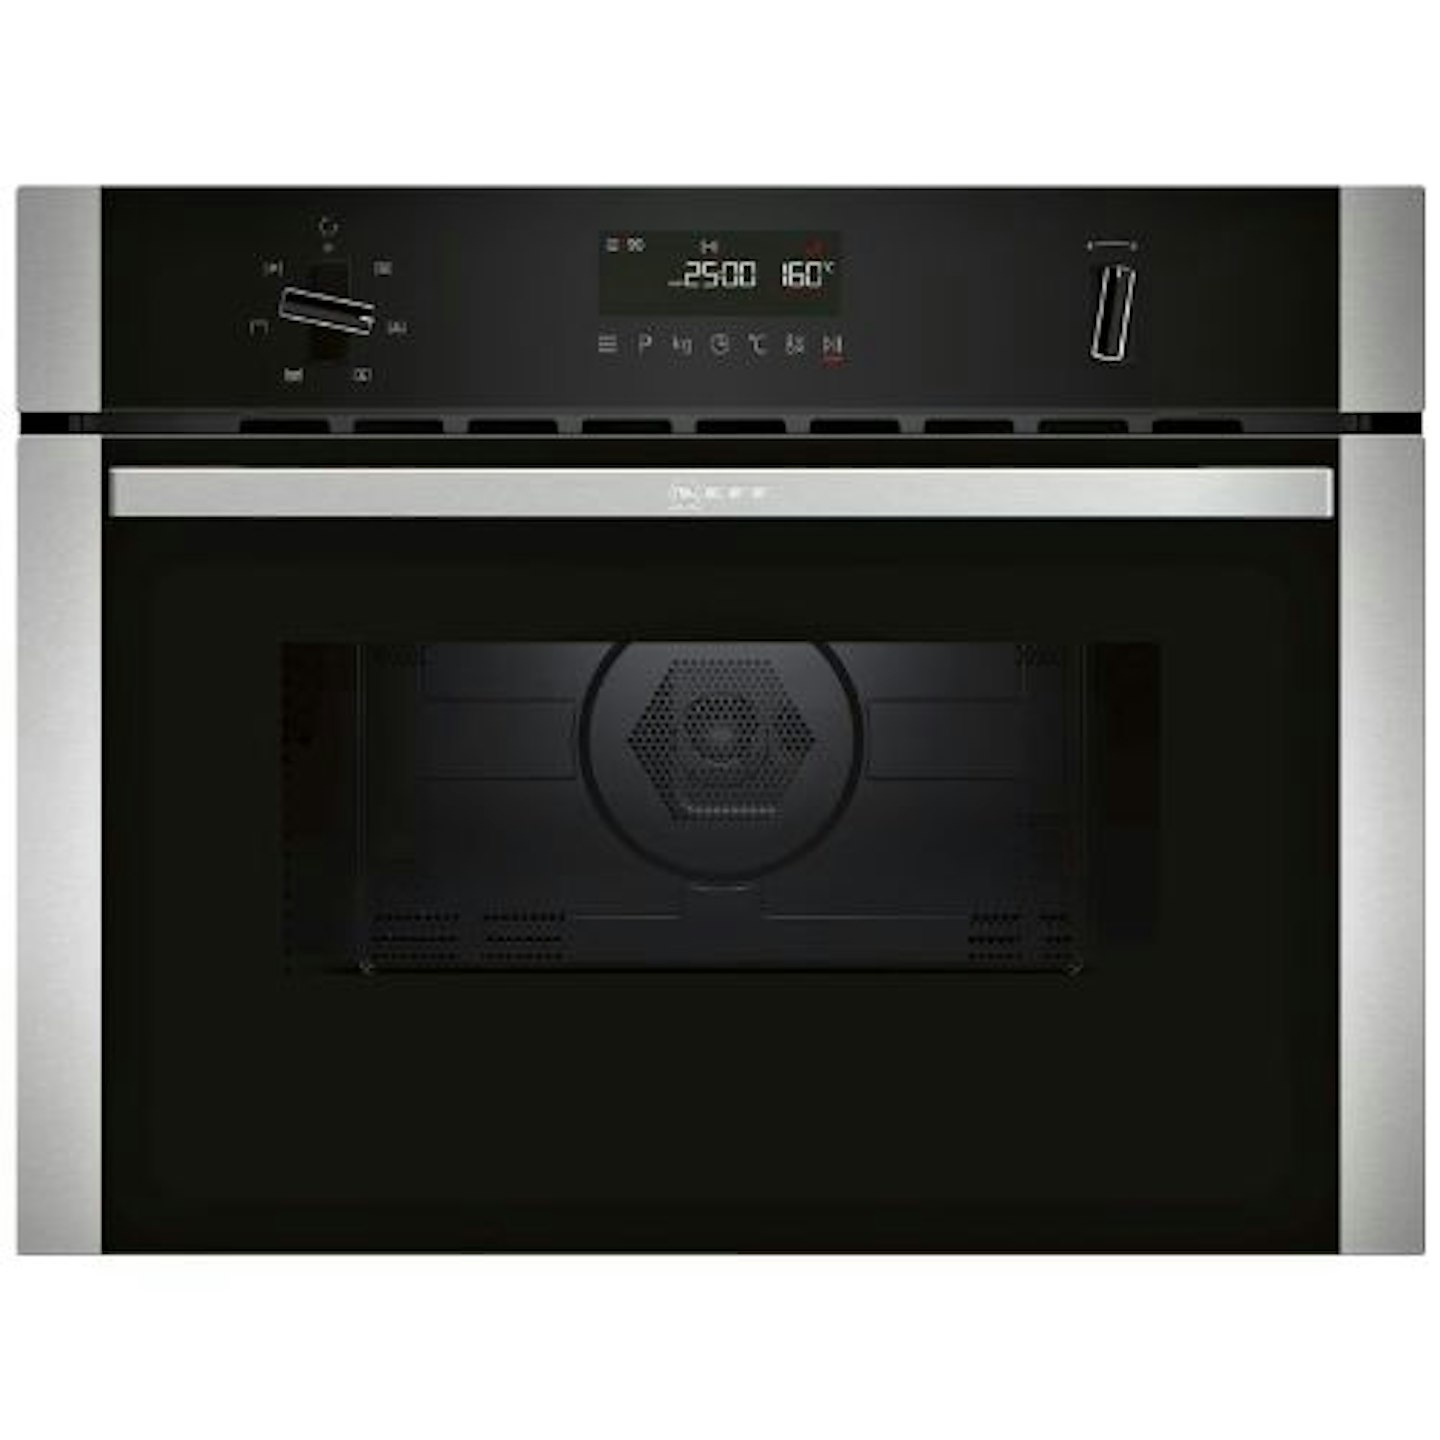 Neff N50 Built-In Combination Microwave Oven